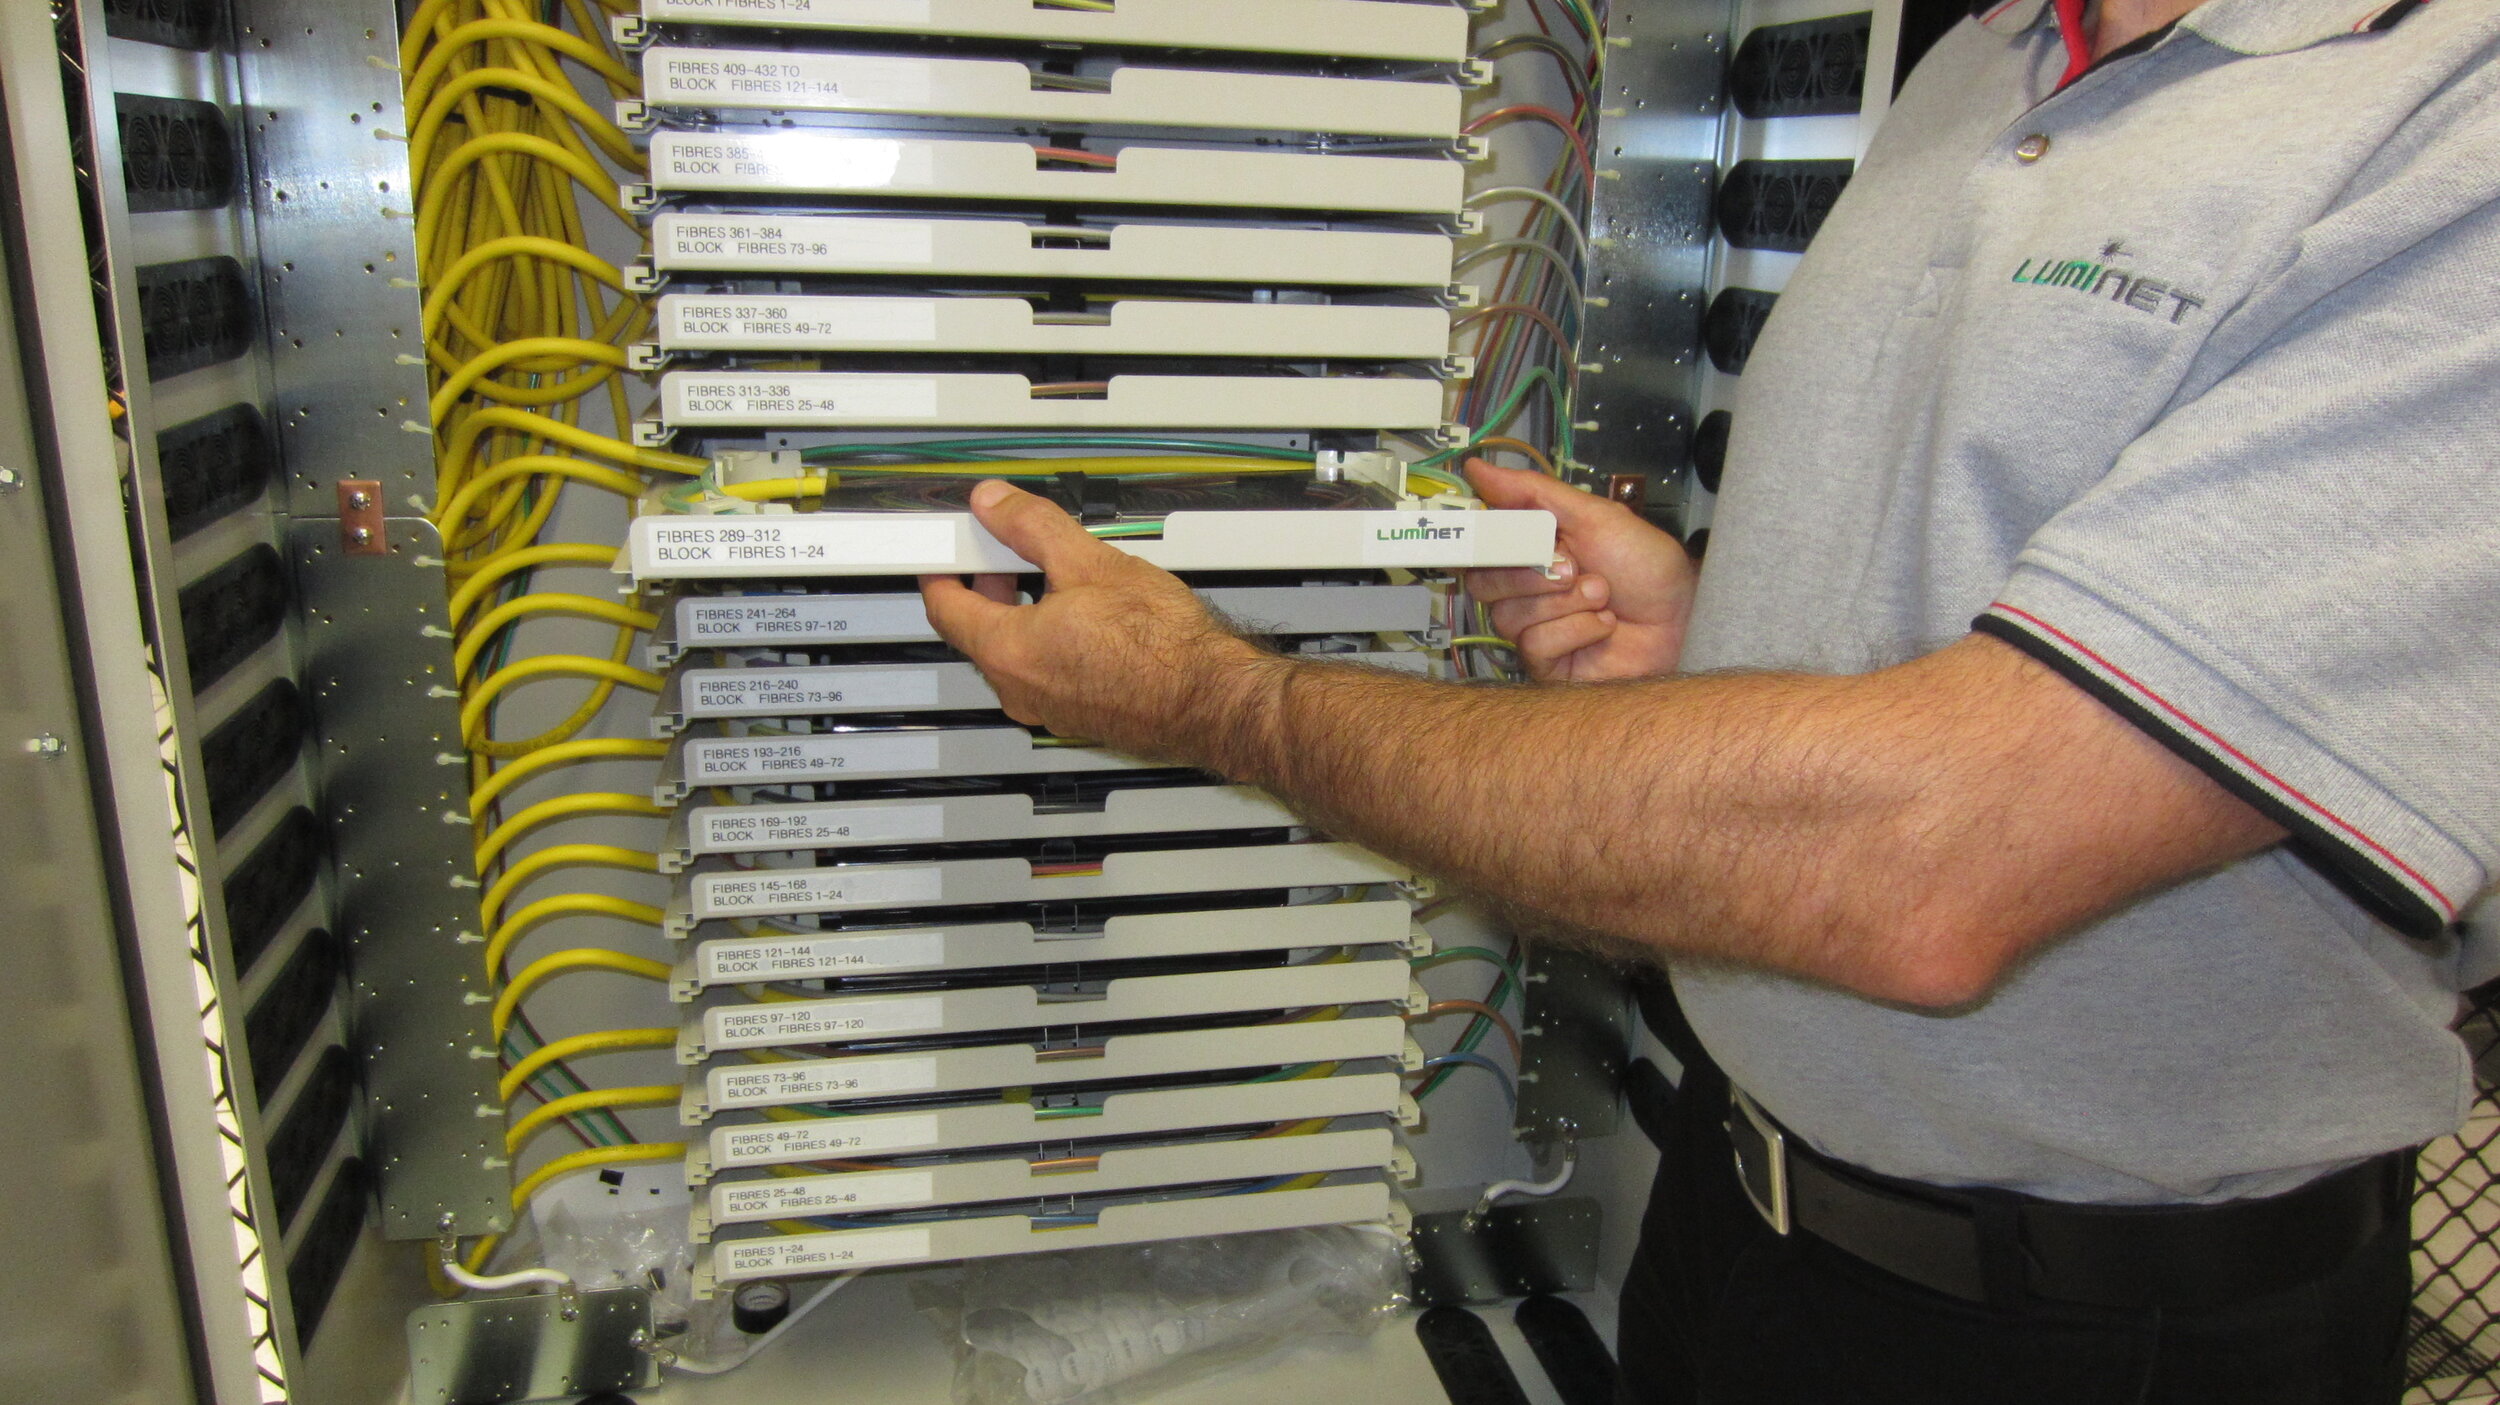 Gallery 2 - Picture 1 - Engineer with splice trays.JPG